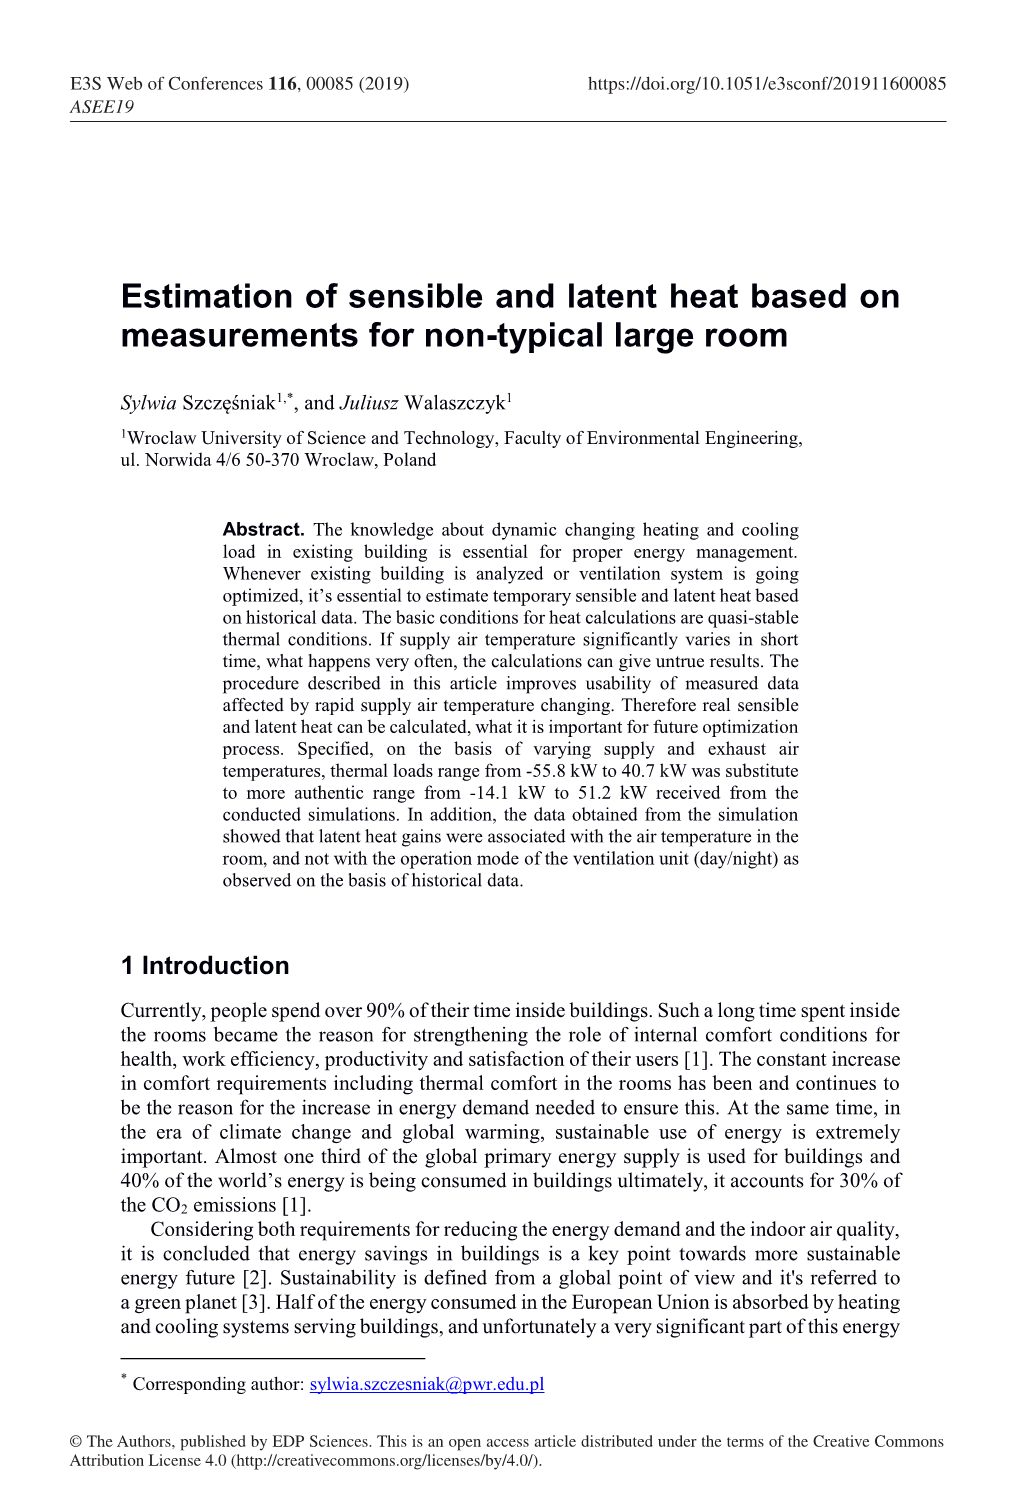 Estimation of Sensible and Latent Heat Based on Measurements for Non-Typical Large Room